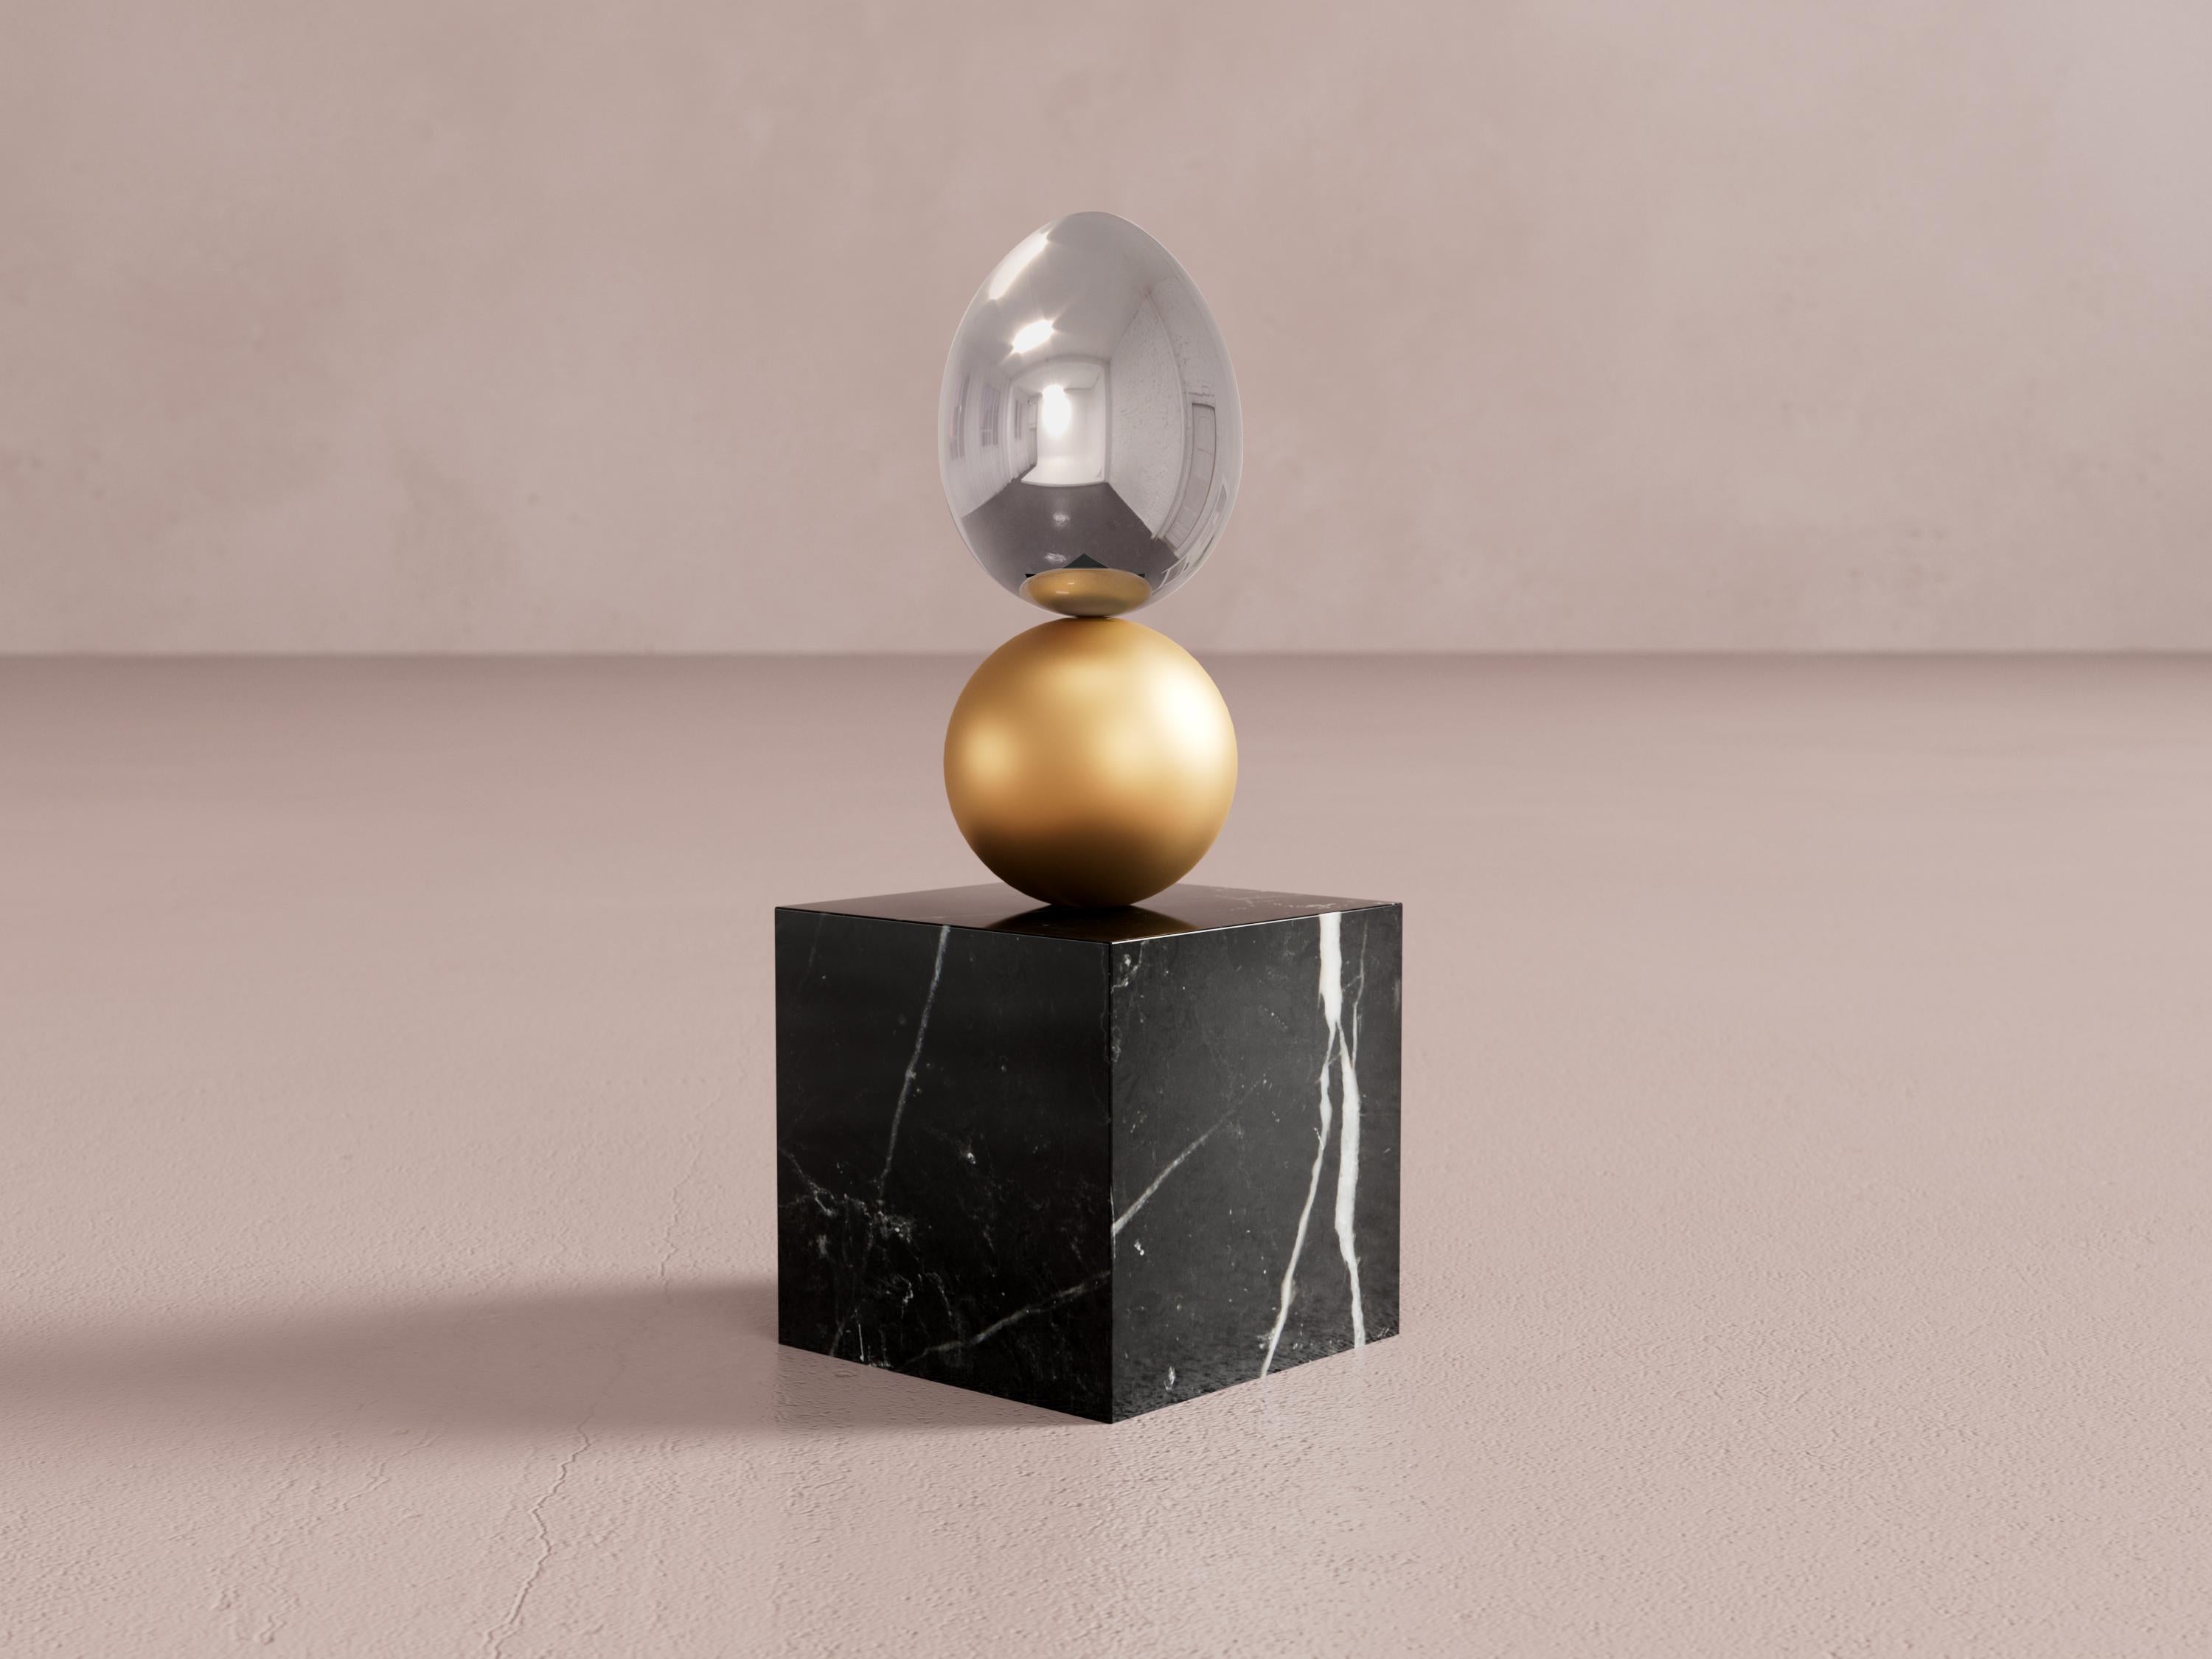 Egg of Mirror Pavillon by Pilar Zeta
Limited Edition of 10 + 2AP pieces.
Materials: stainless steel, brass and marble.
Dimensions: W 48 x D 48 x H 120 cm.
Weight: 100 kg.

Egg sculpture. Stainless steel, brass and marble.

Argentinian-born